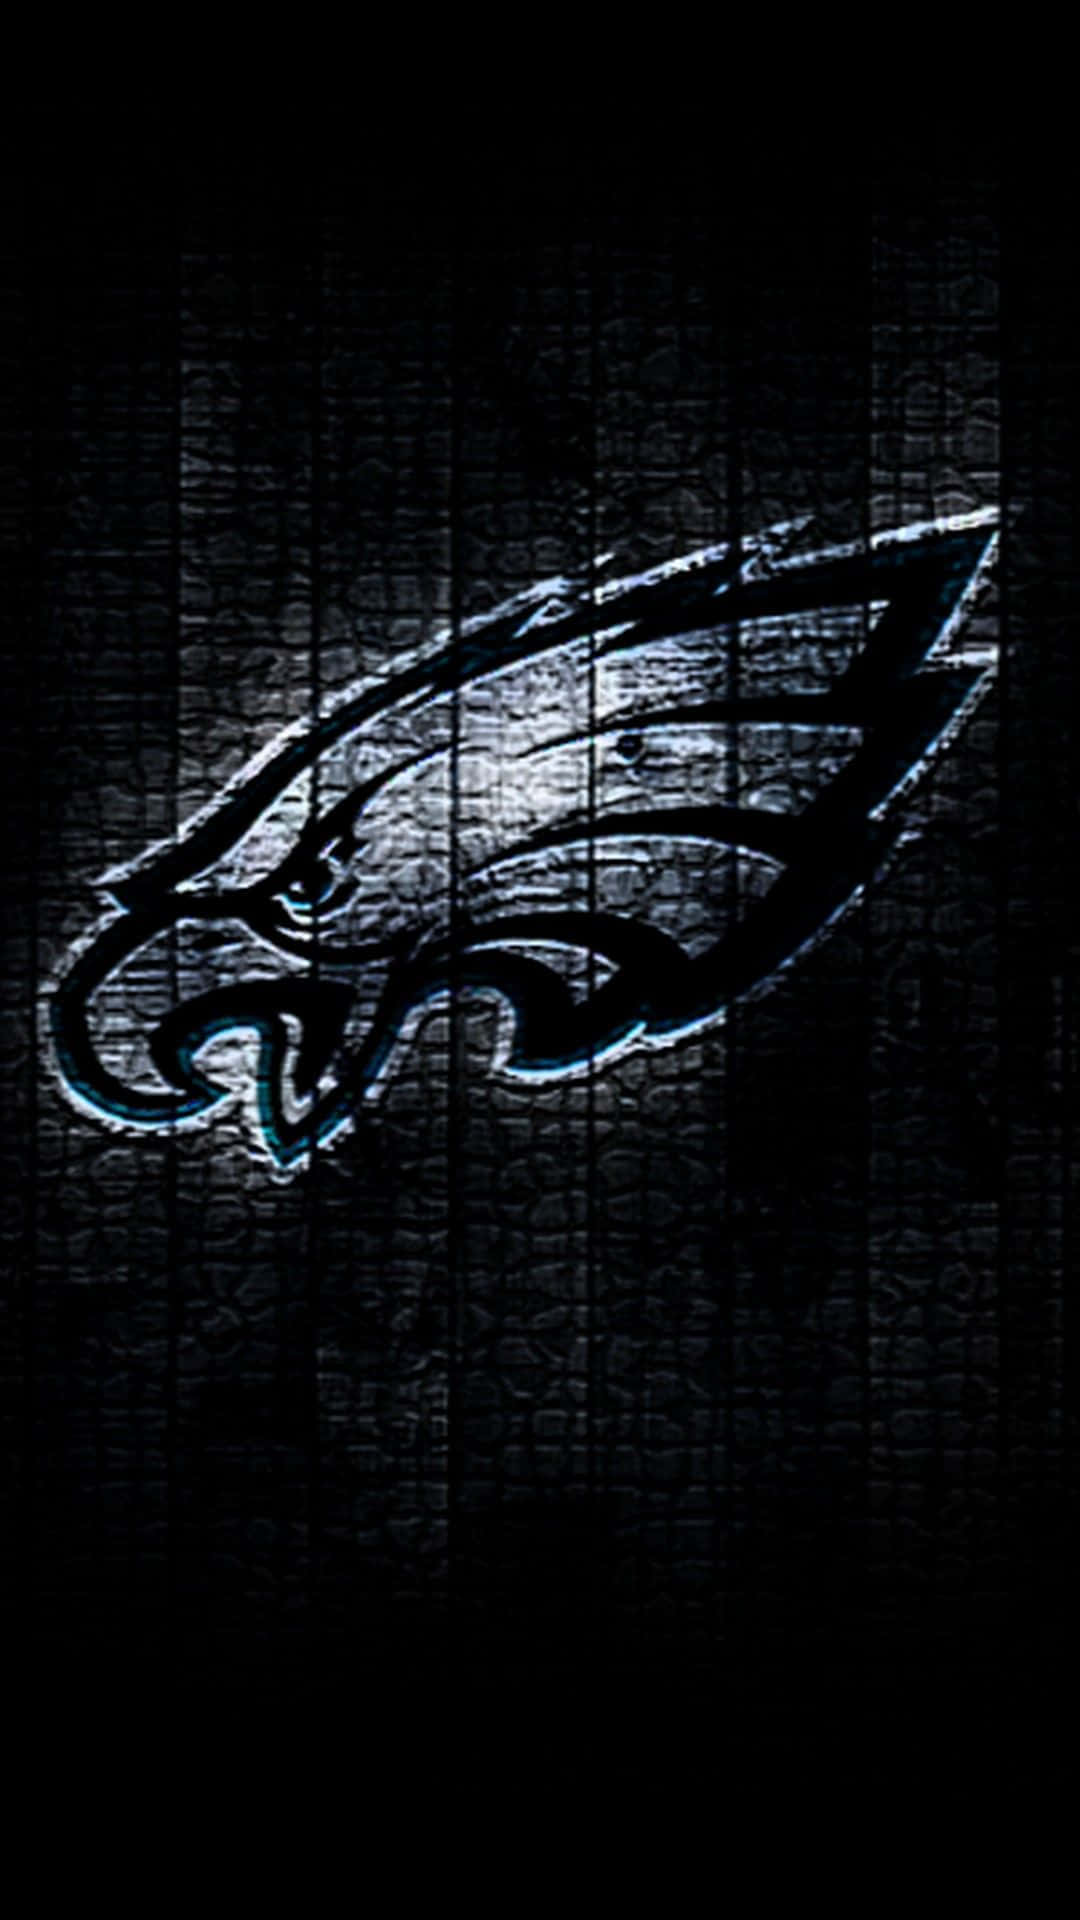 Get ready for the Eagles season with this custom Philadelphia Eagles iPhone Wallpaper